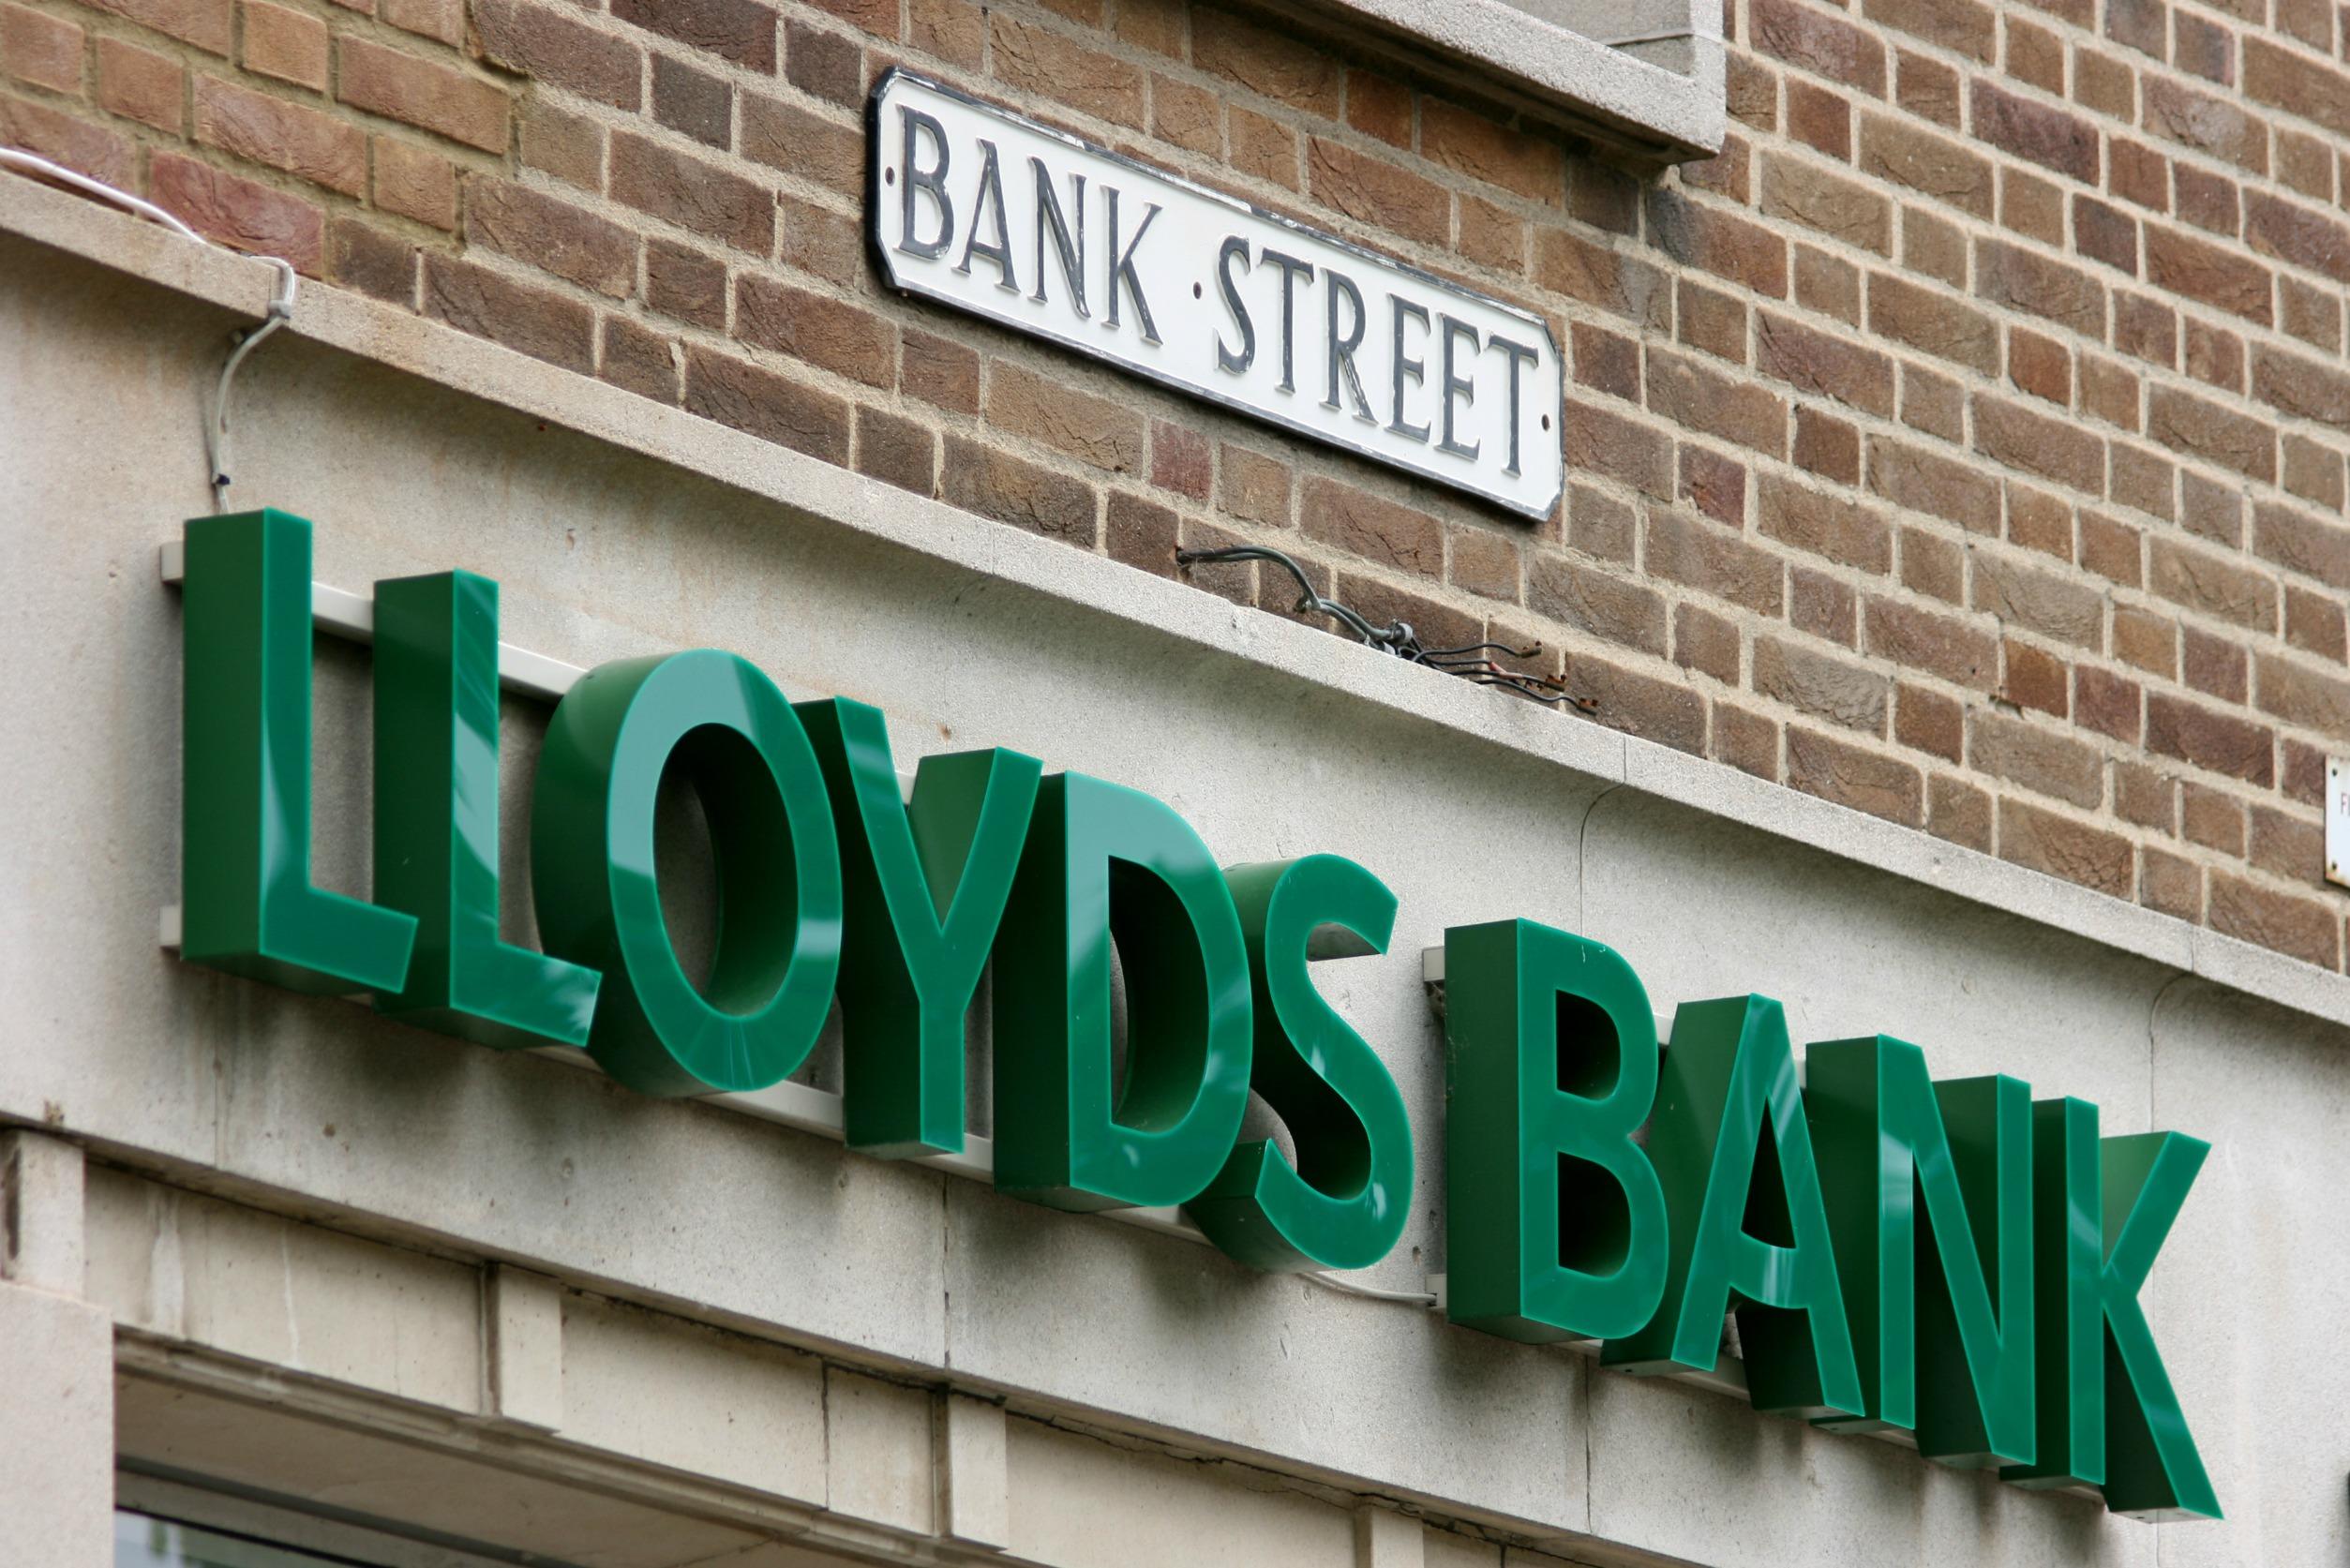 Lloyds Share Price Dips Amid Higher-Than-Expected CPI Reading